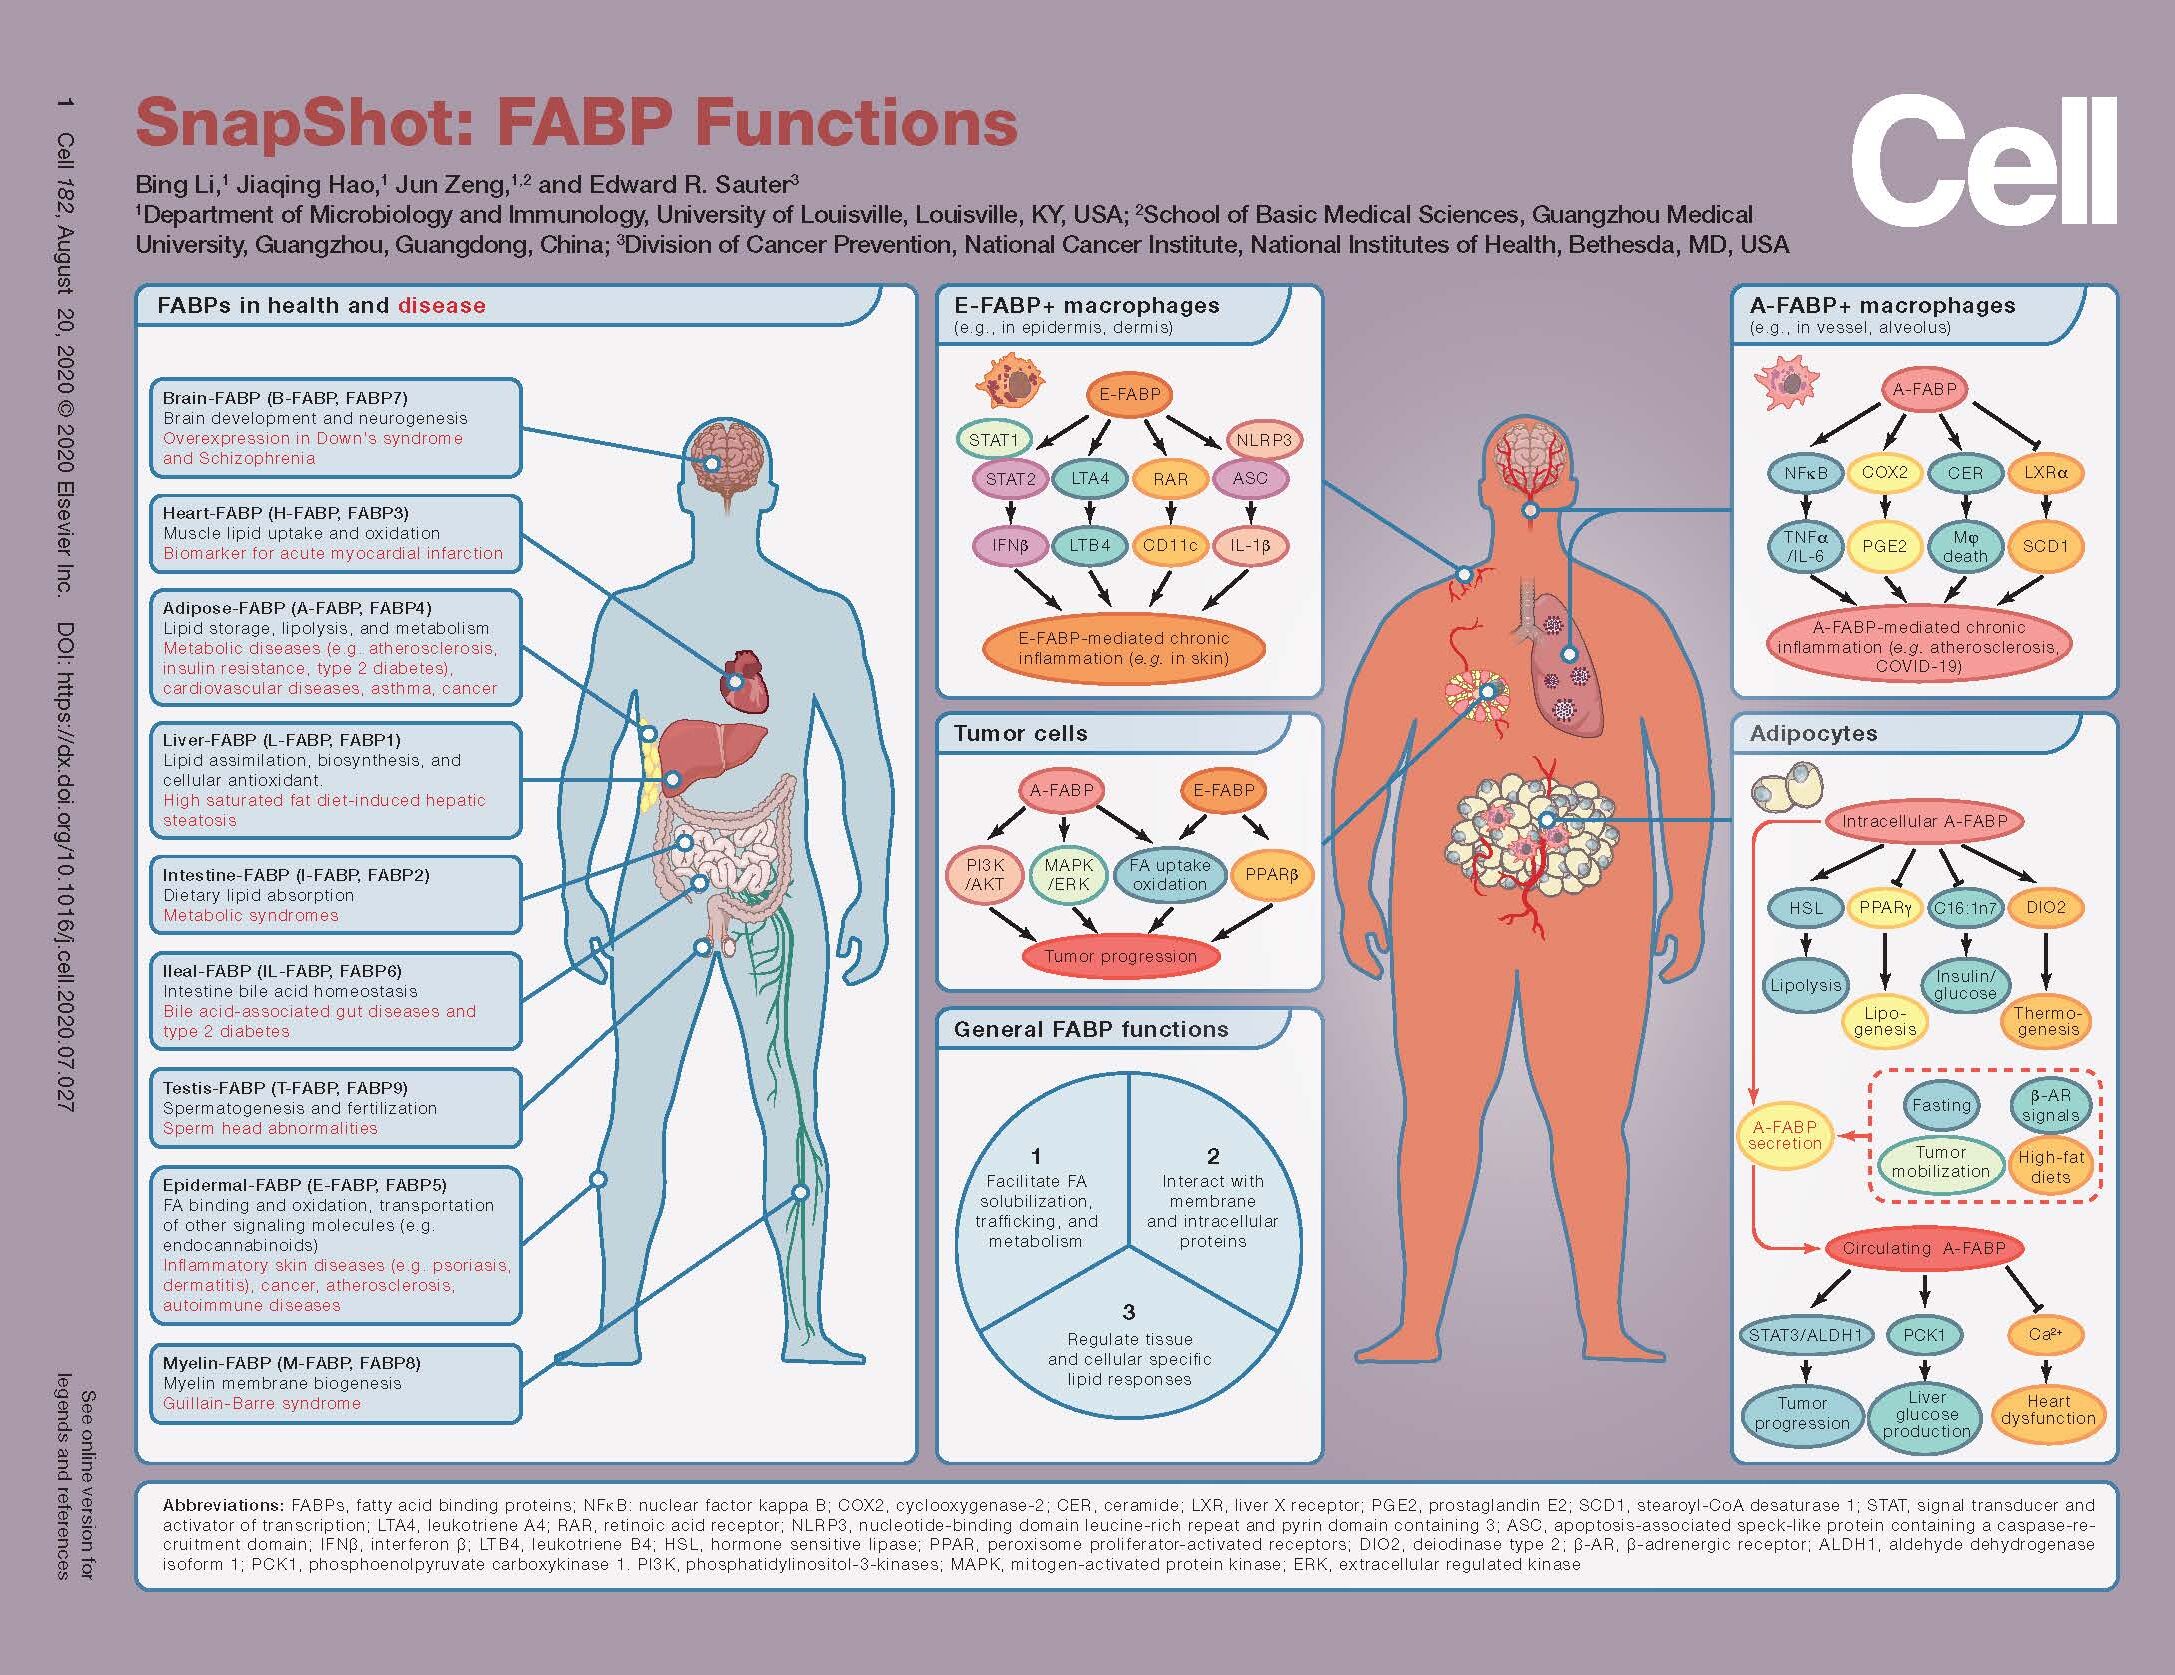 SnapShot created by Bing Li, Ph.D., to illustrate the functions of fatty acid binding proteins (FABPs)